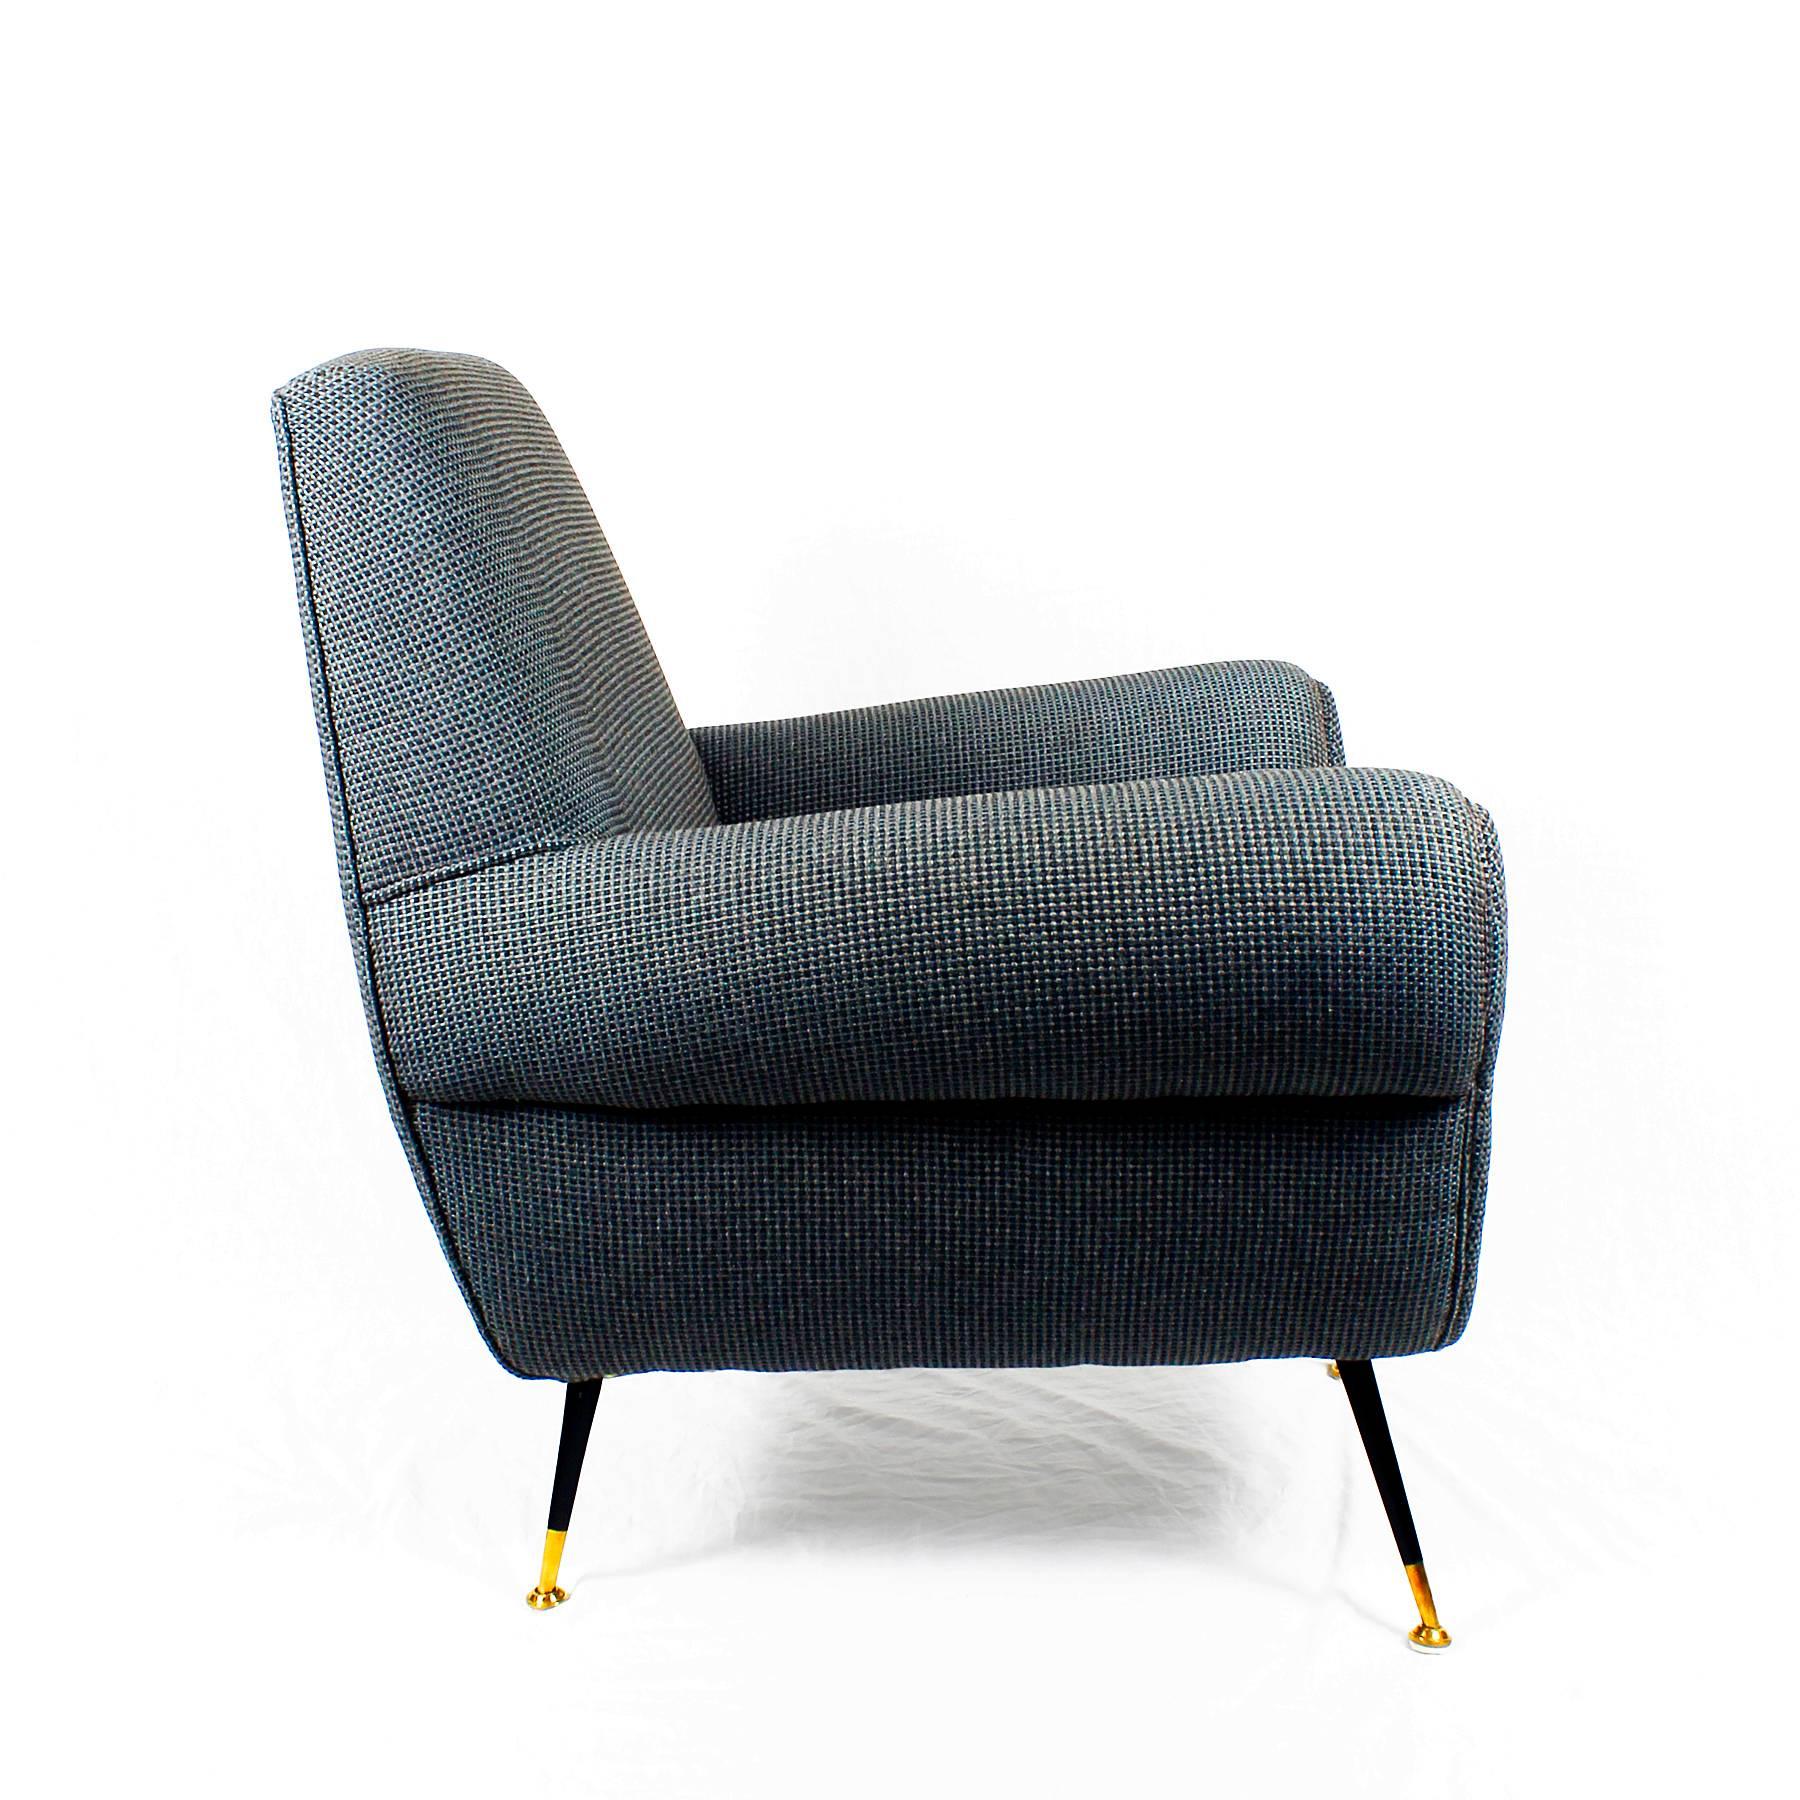 Armchair, black steel stands and polished brass feet. Restored and reupholstered with a black, brown and blue fabric.
Design: Gigi Radice
Maker: Minotti

Italy, circa 1960 

Measures: Smaller 87 x 75 x 88 cm seat 47 cm
Bigger 88 x 77 x 92 cm